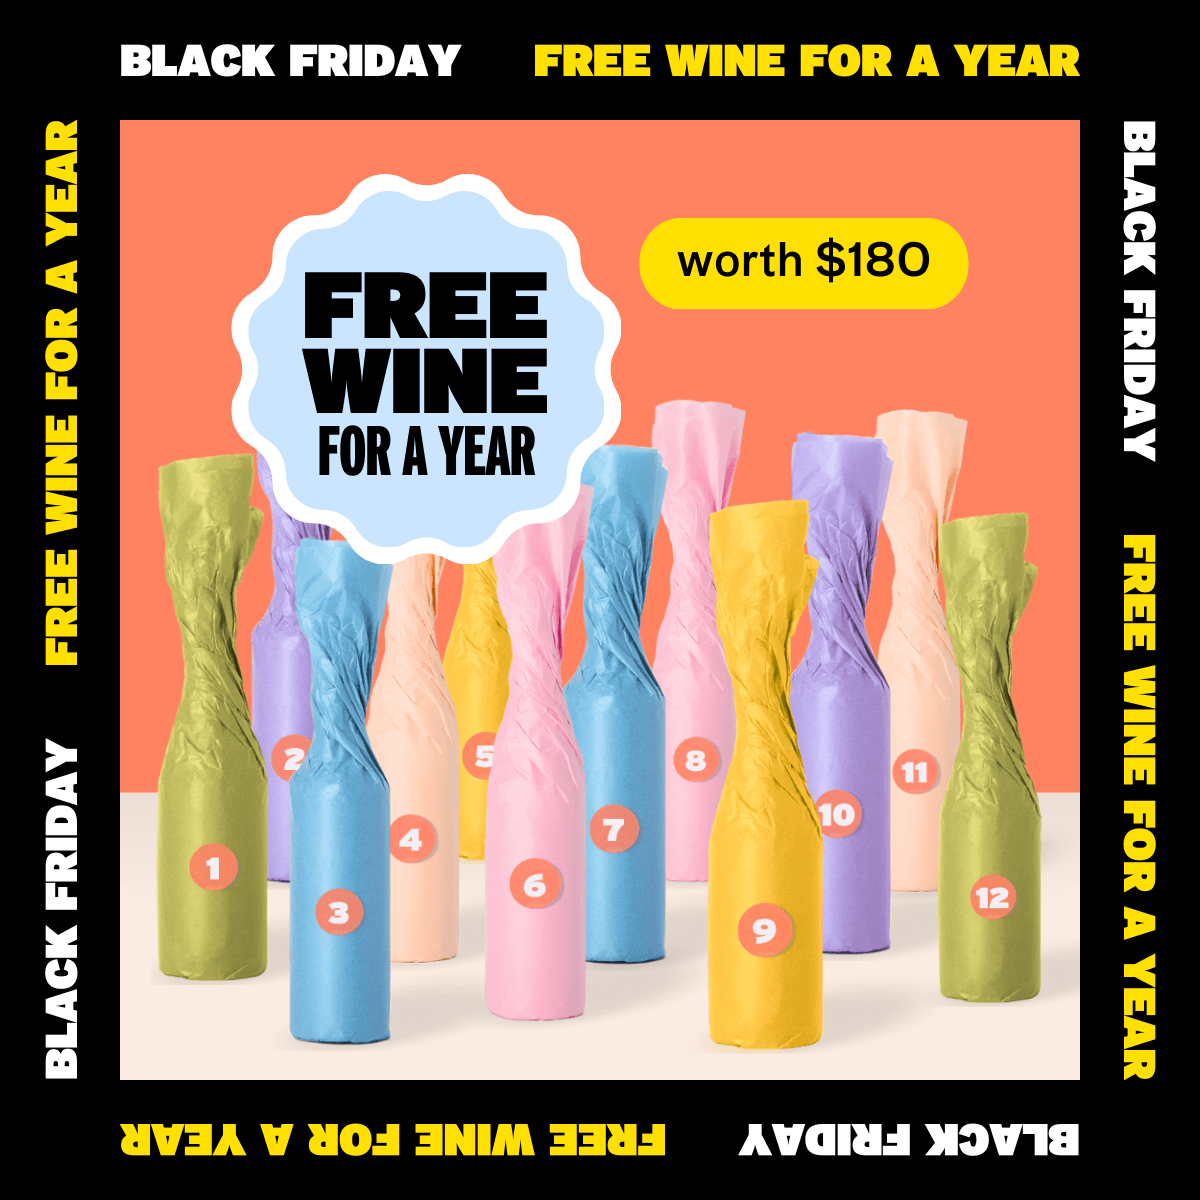 Good Pair Days - Black Friday Wine Deal - Free Wine For a Year